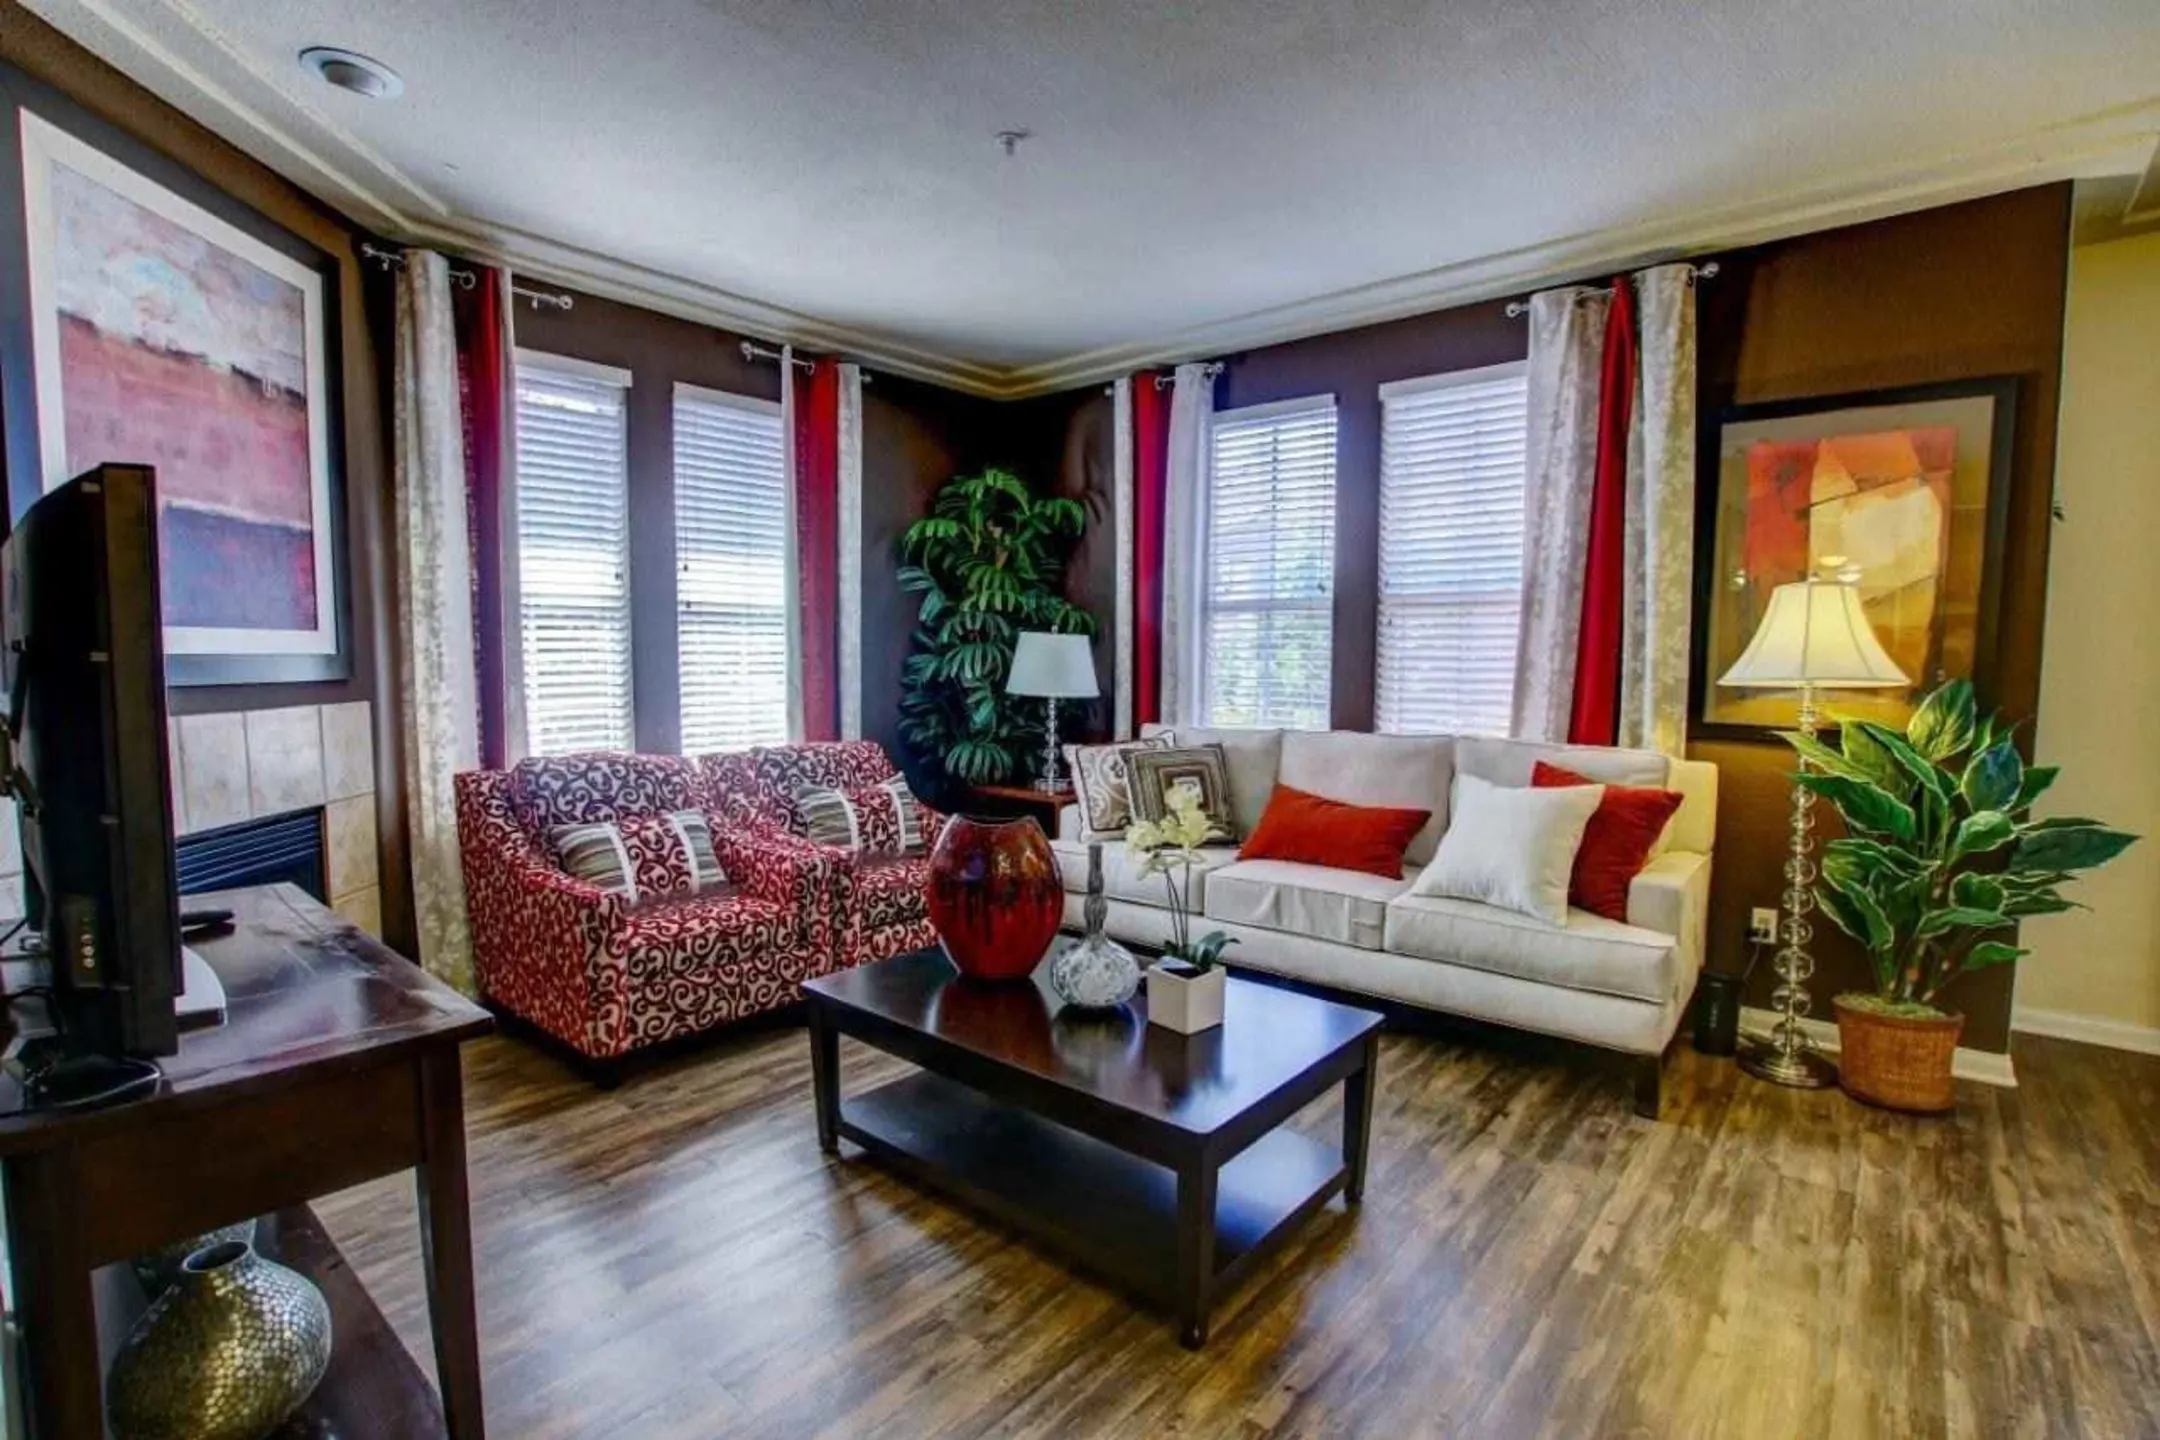 Living Room - Prominence Apartments - San Marcos, CA